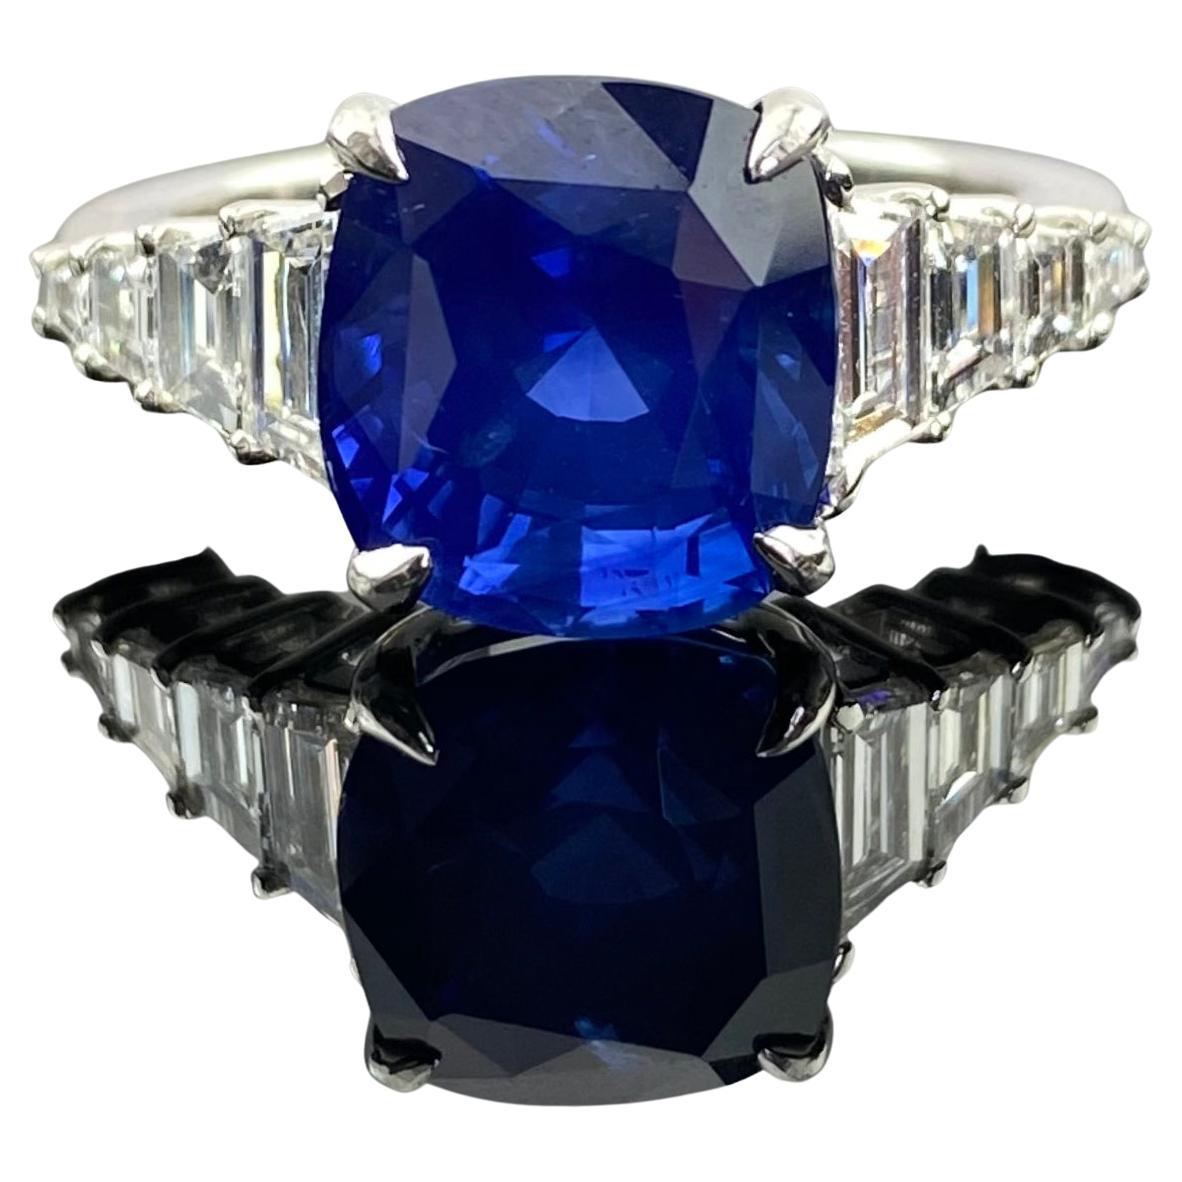 Indulge in the allure of this 18K white gold ring, adorned with a cluster of eight brilliant VVS quality diamonds totaling 0.88 carats and a mesmerizing Blue Sapphire weighing 6.05 carats. The diamonds shimmer with unmatched brilliance, perfectly